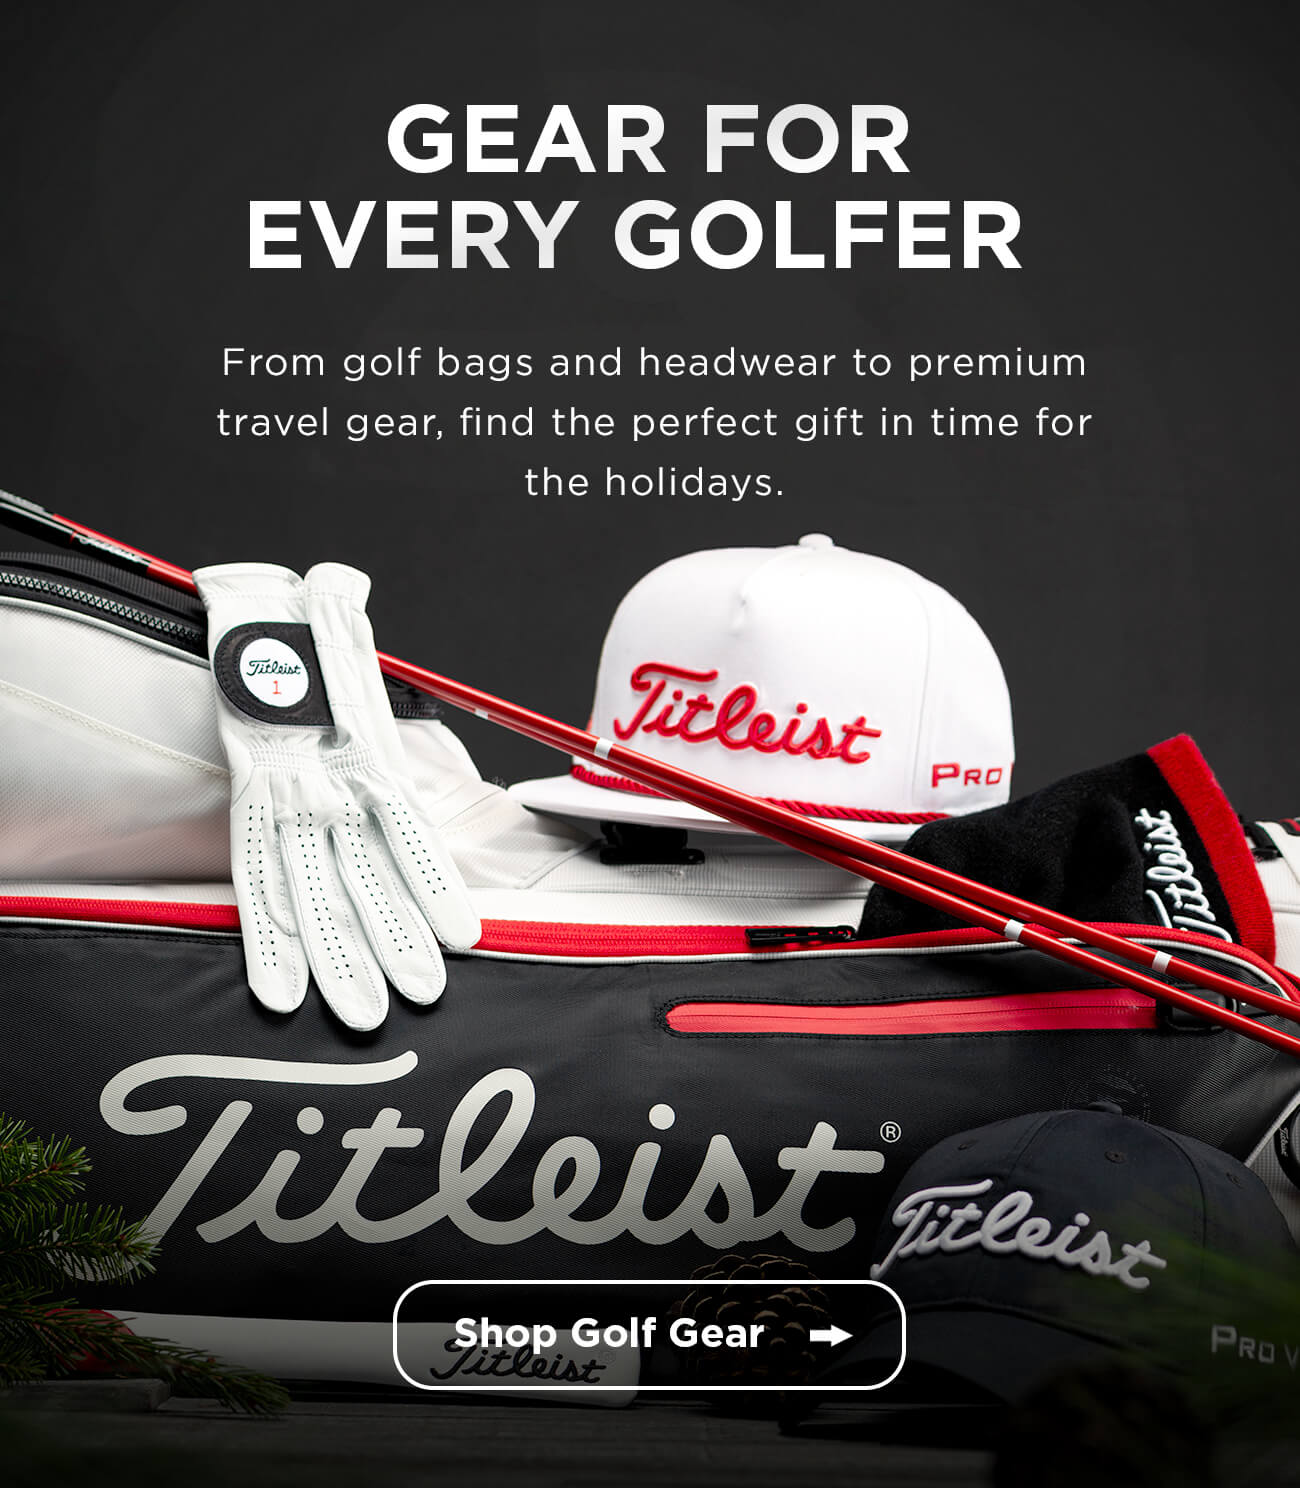 Shop Golf Gear for the Holidays